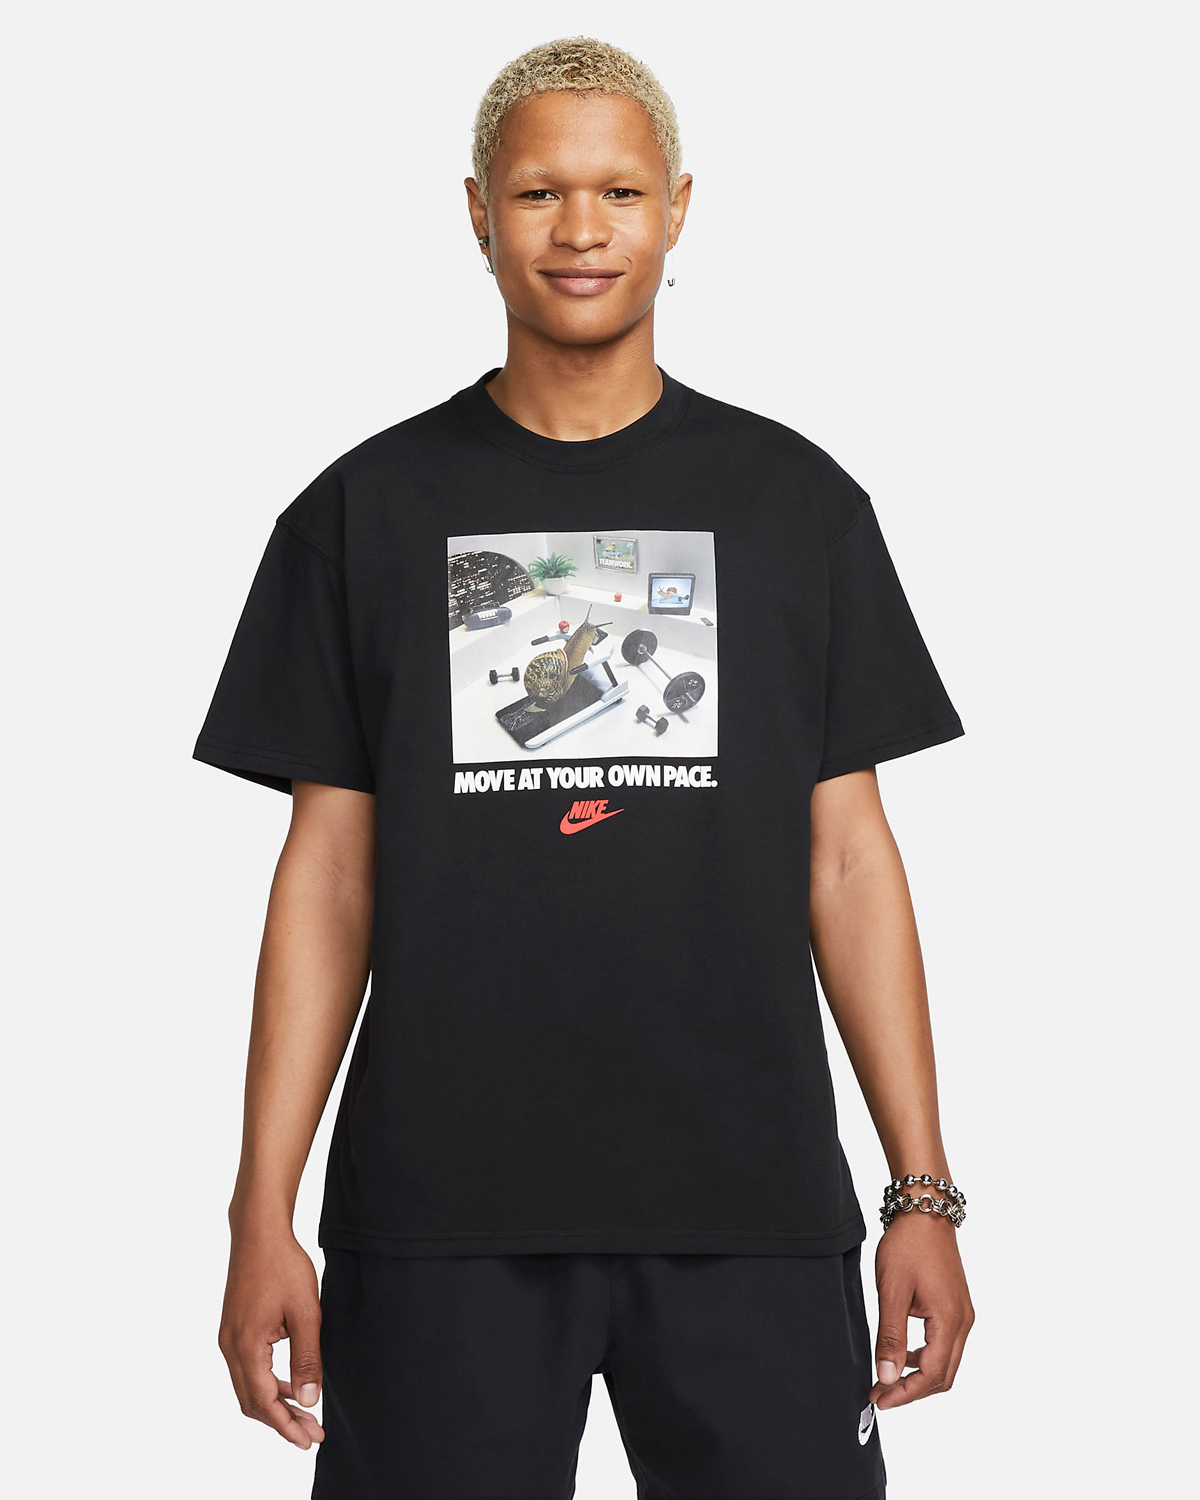 Nike-Sportswear-Move-At-Your-Own-Pace-Snail-T-Shirt-Black-1